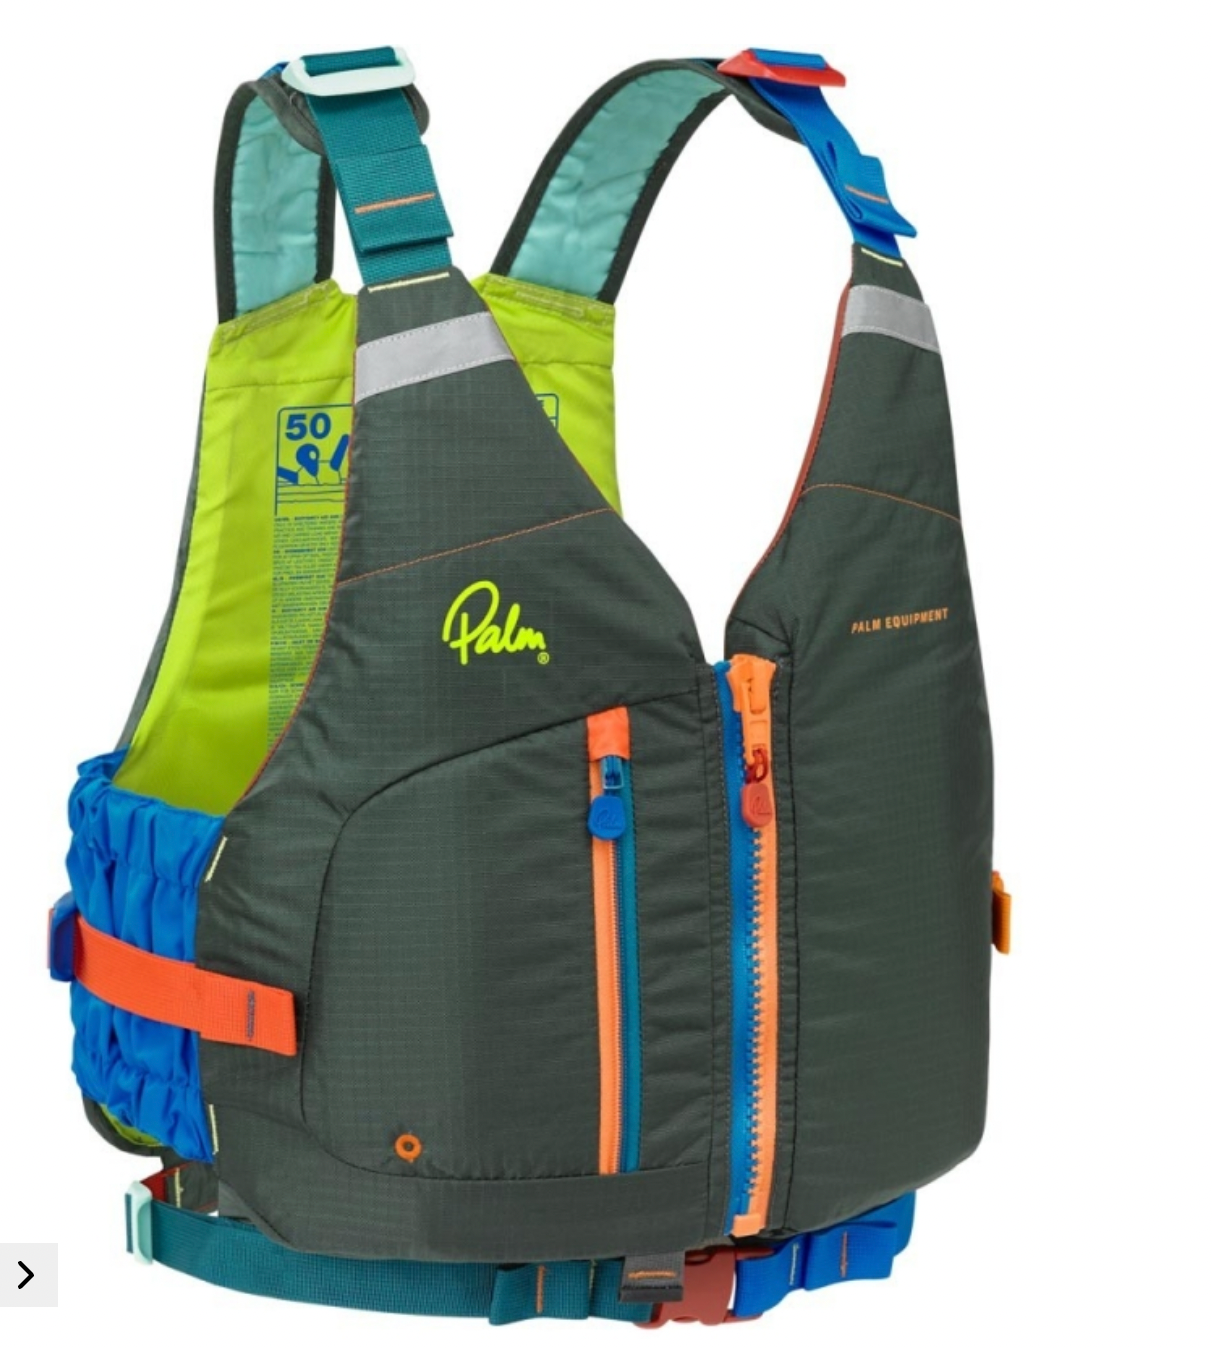 Palm Meander PFD special edition